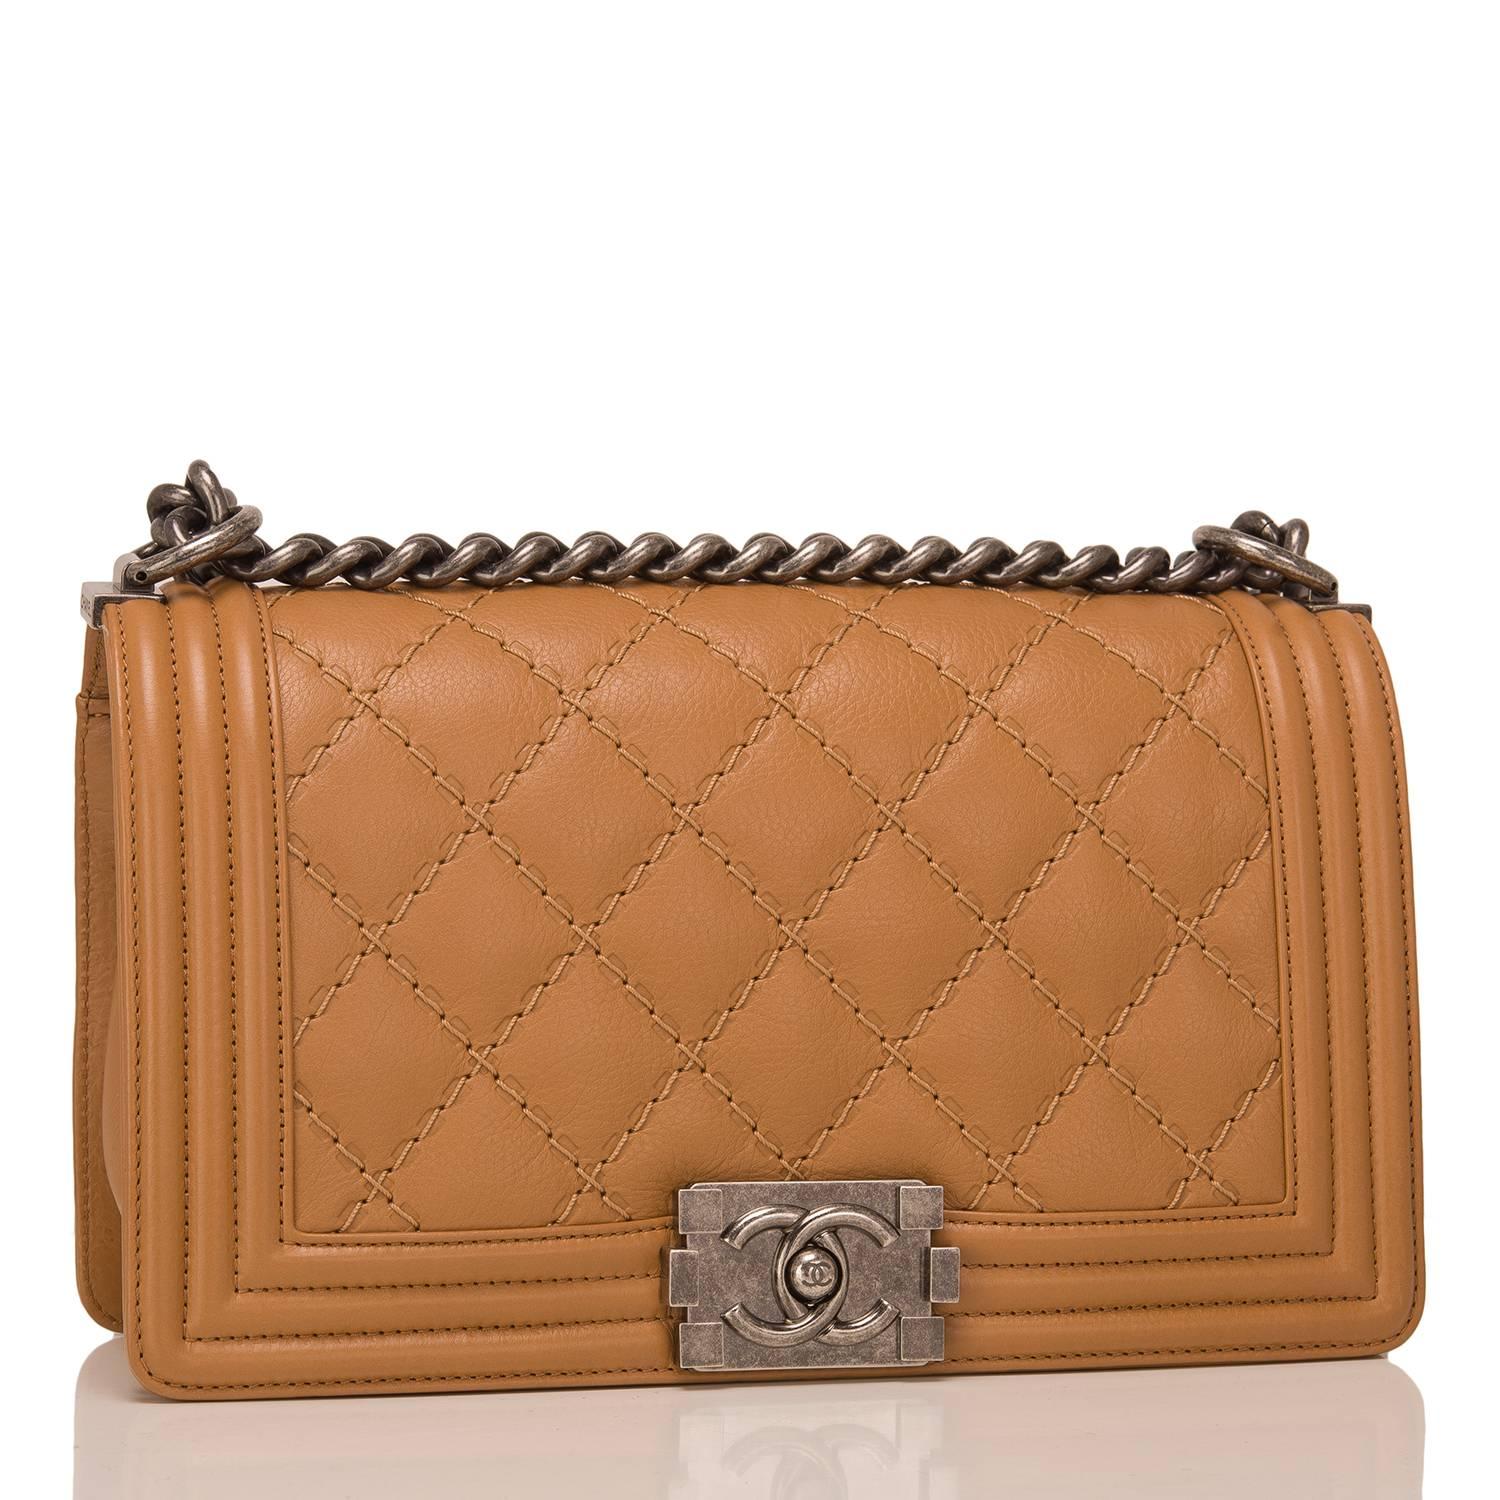 Chanel Old Medium Boy bag of camel quilted calfskin and ruthenium hardware.

This Chanel bag is in the classic Boy style with a full front flap with the Boy signature CC push lock closure detail and ruthenium chain link and camel leather padded